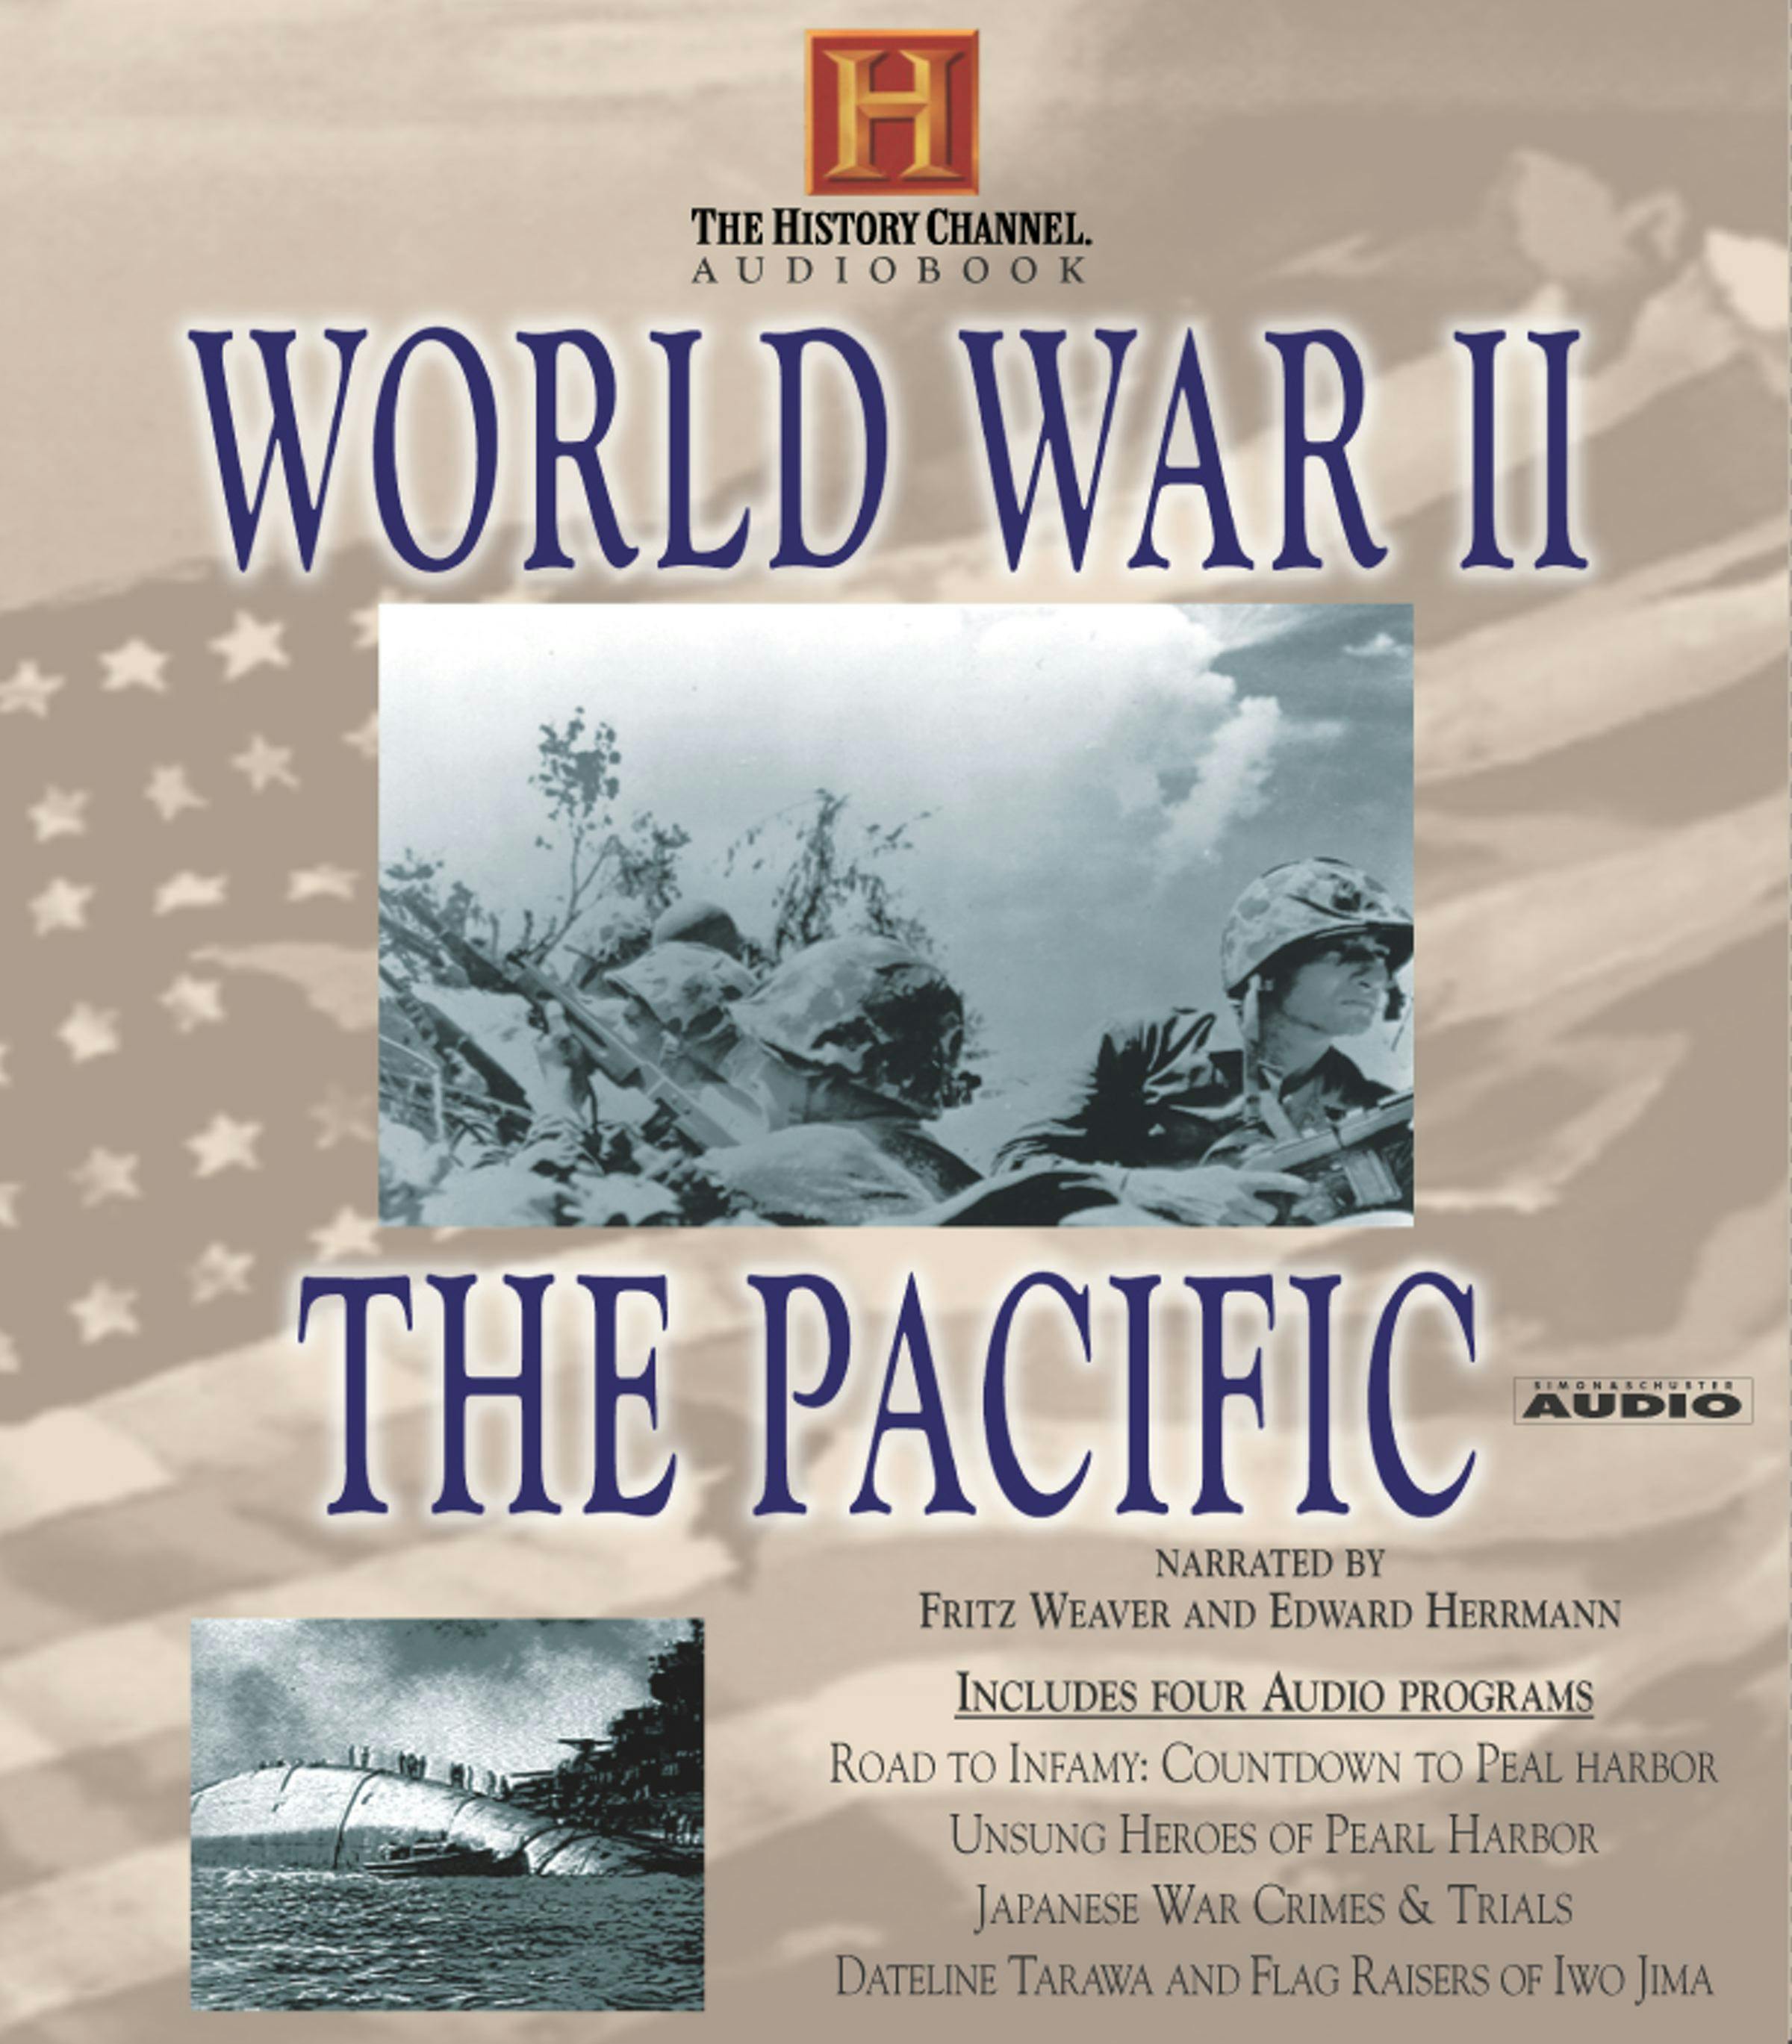 World War II: The Pacific - undefined